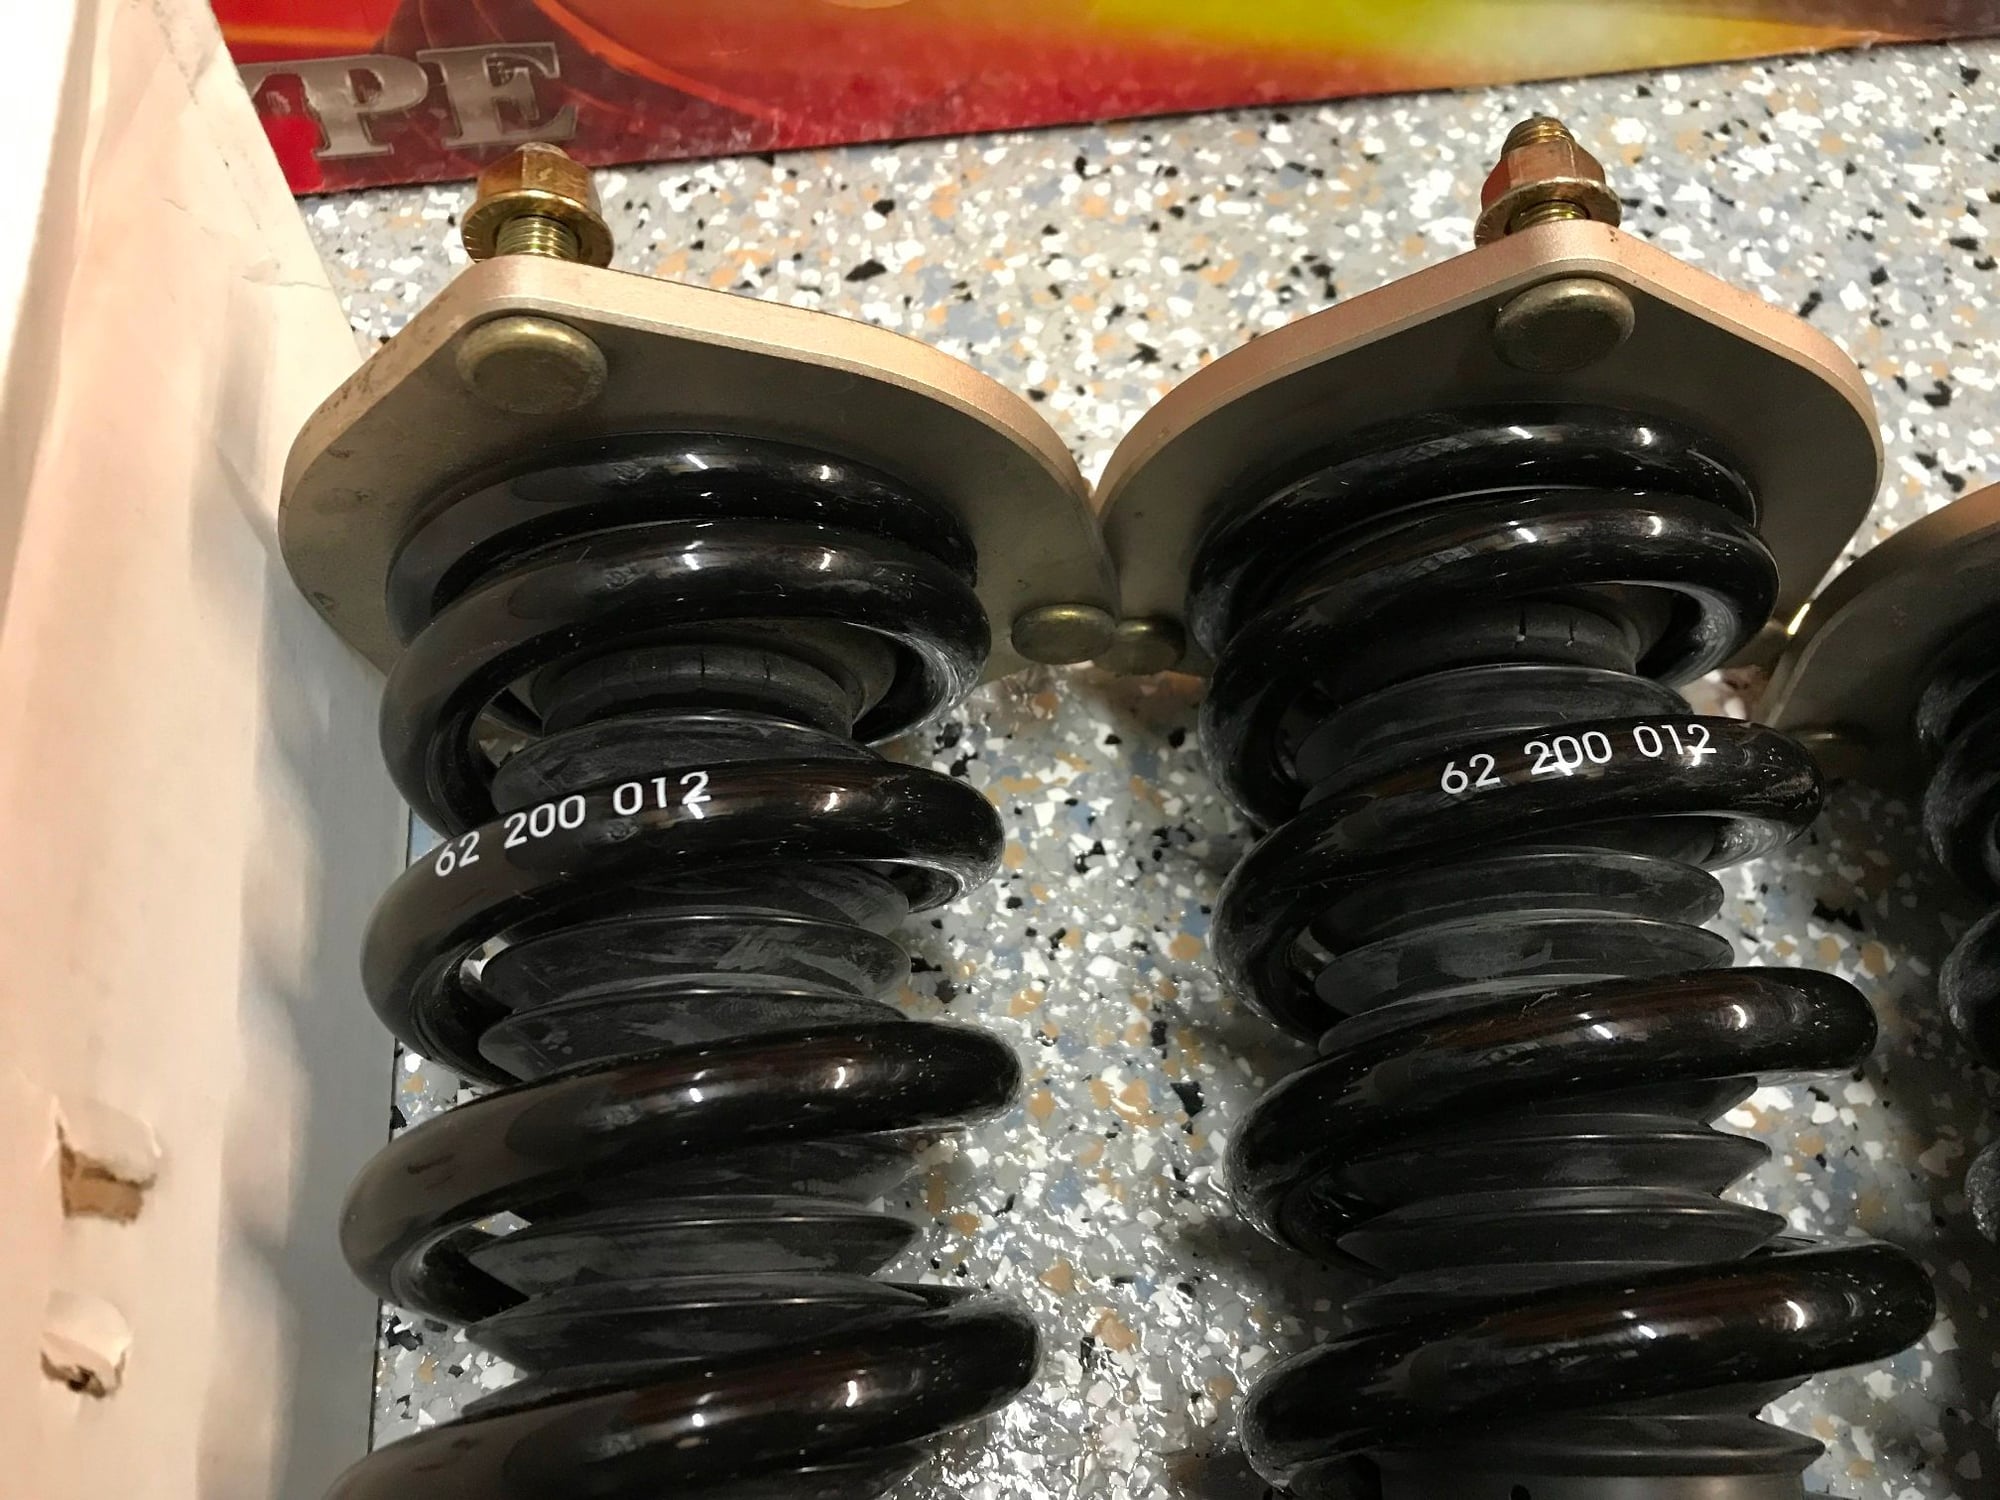 Steering/Suspension - FS: BC Racing Coilovers LS400 90-00 UCF10/UCF20 - Used - 1990 to 2000 Lexus LS400 - Lake Forest, CA 92630, United States